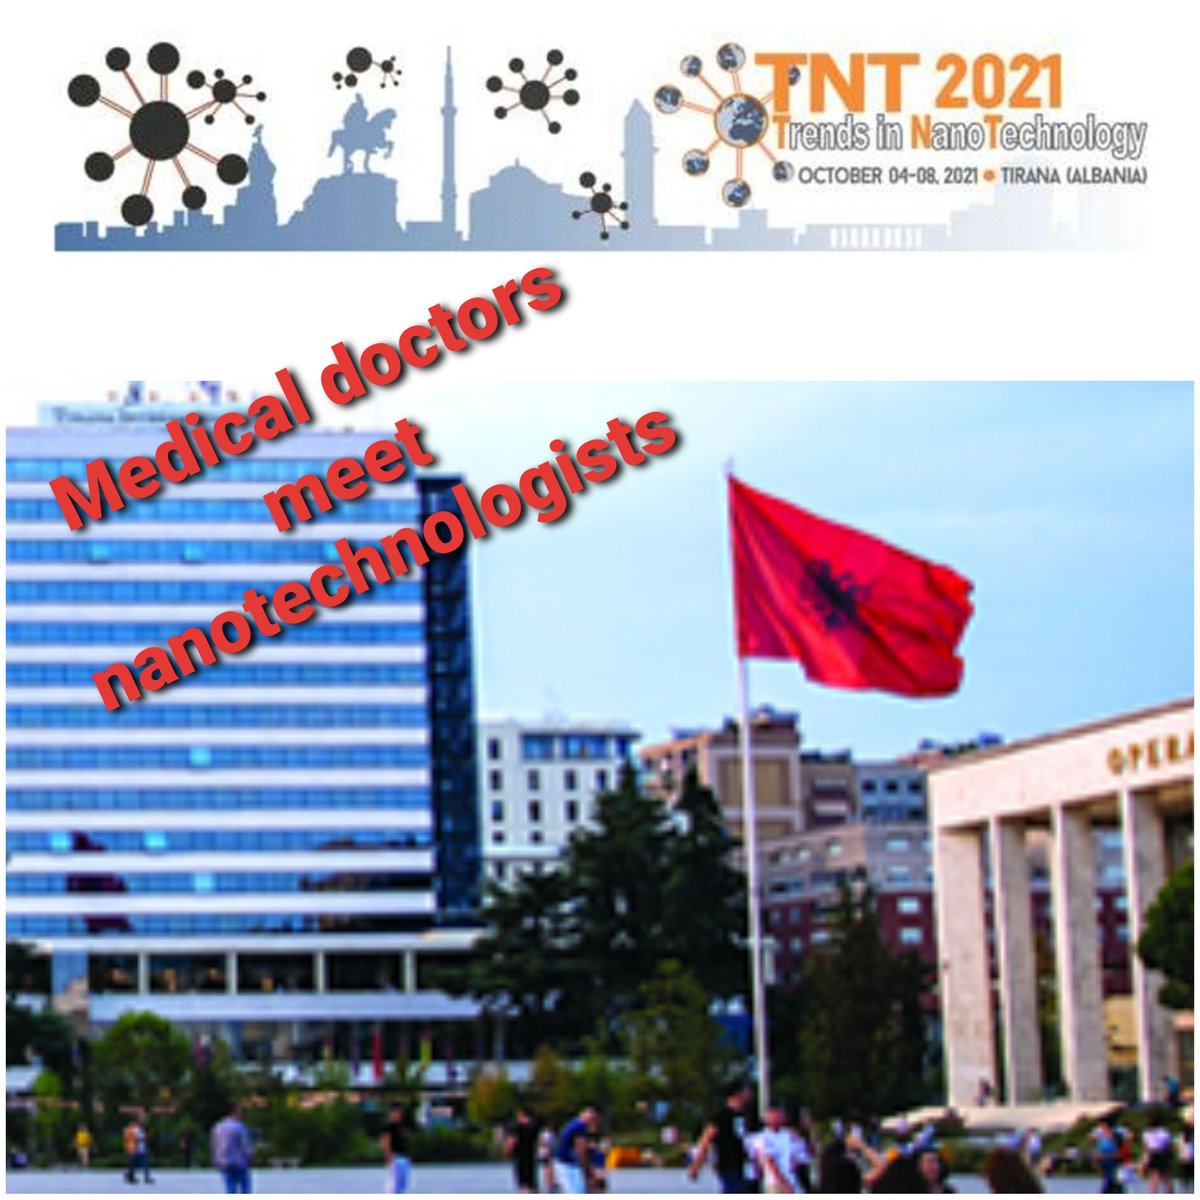 Special session (mixed online/in-person), on Oct. 4th, at #TNT2021 to be held in #Tirana, #Albania 🇦🇱
👩‍⚕️👨‍⚕️#MedicalDoctors meet #nanotechnologists: recent trends in #nanotheranostics. @JonelTrebicka
@MicrobPredict @PhantomsNet @icn2nano   @nano_alb
📒Info:  tntconf.org/2021/programme…